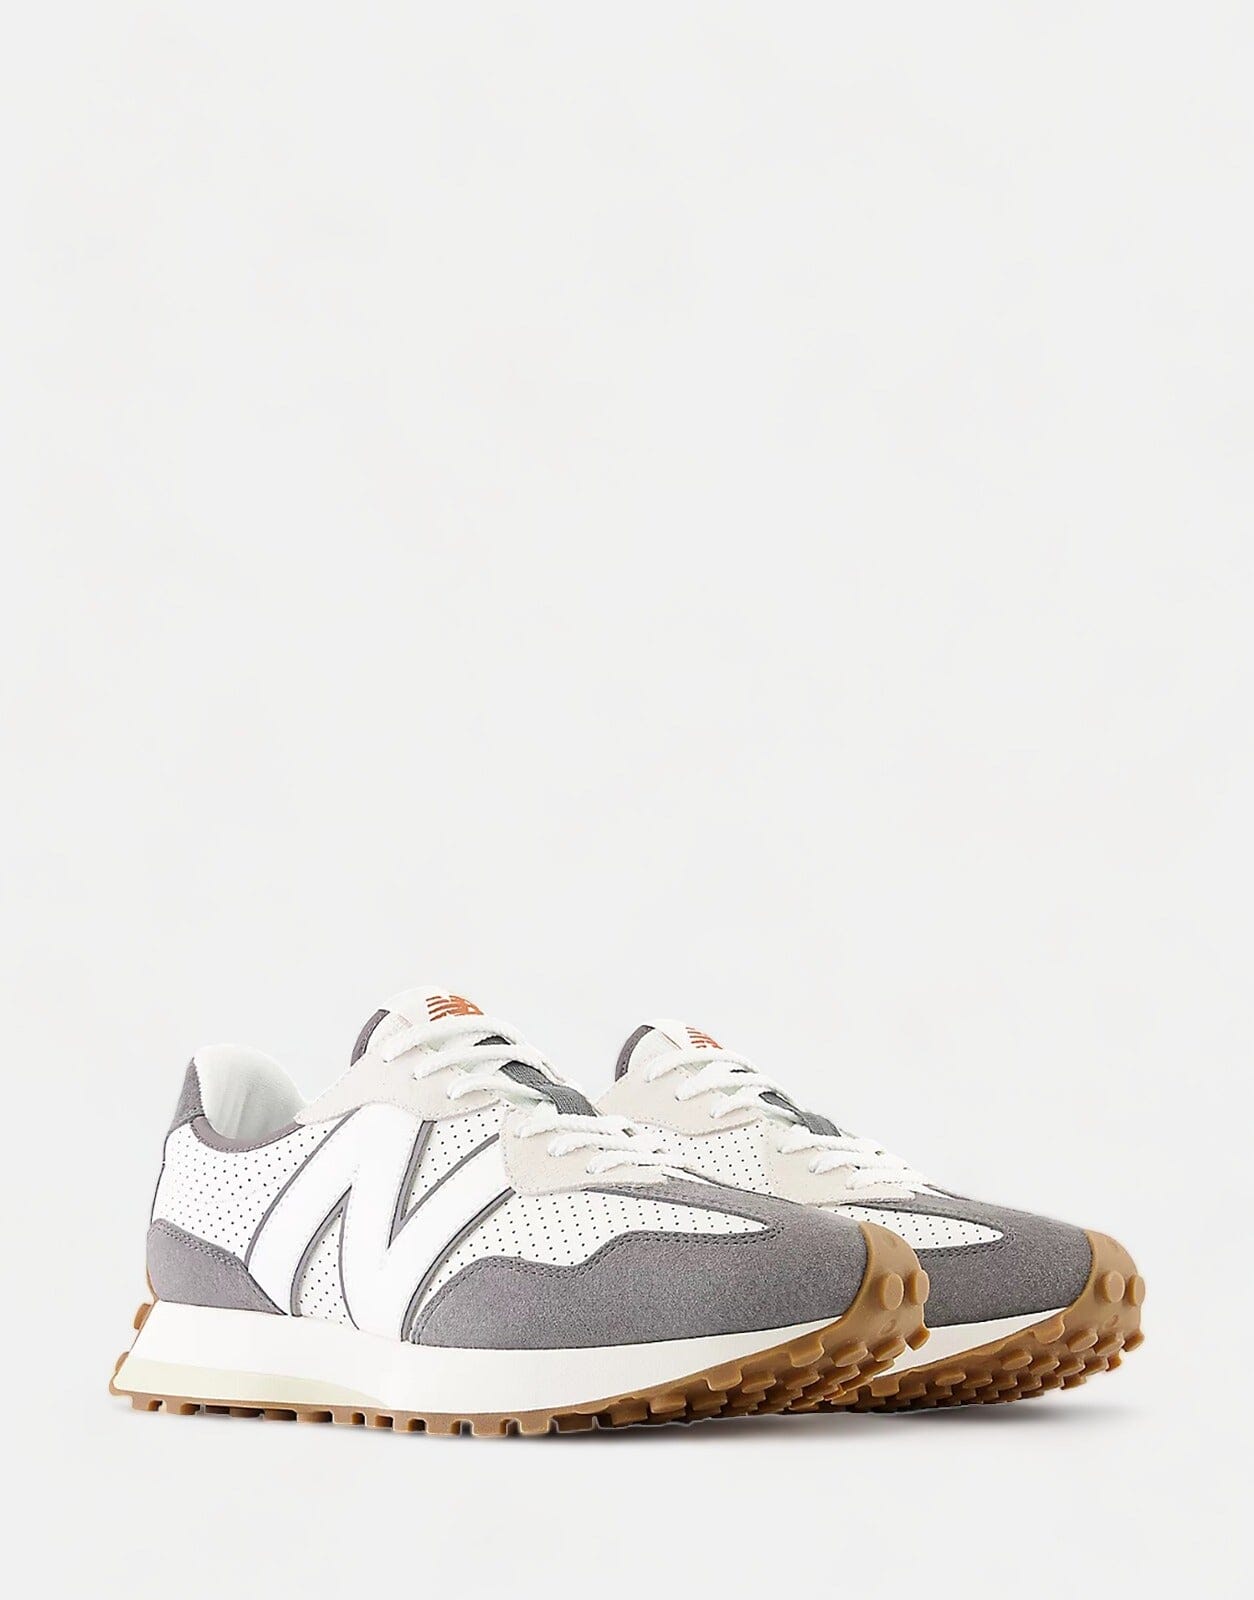 New Balance 327 Perforated Grey Sneakers - Subwear